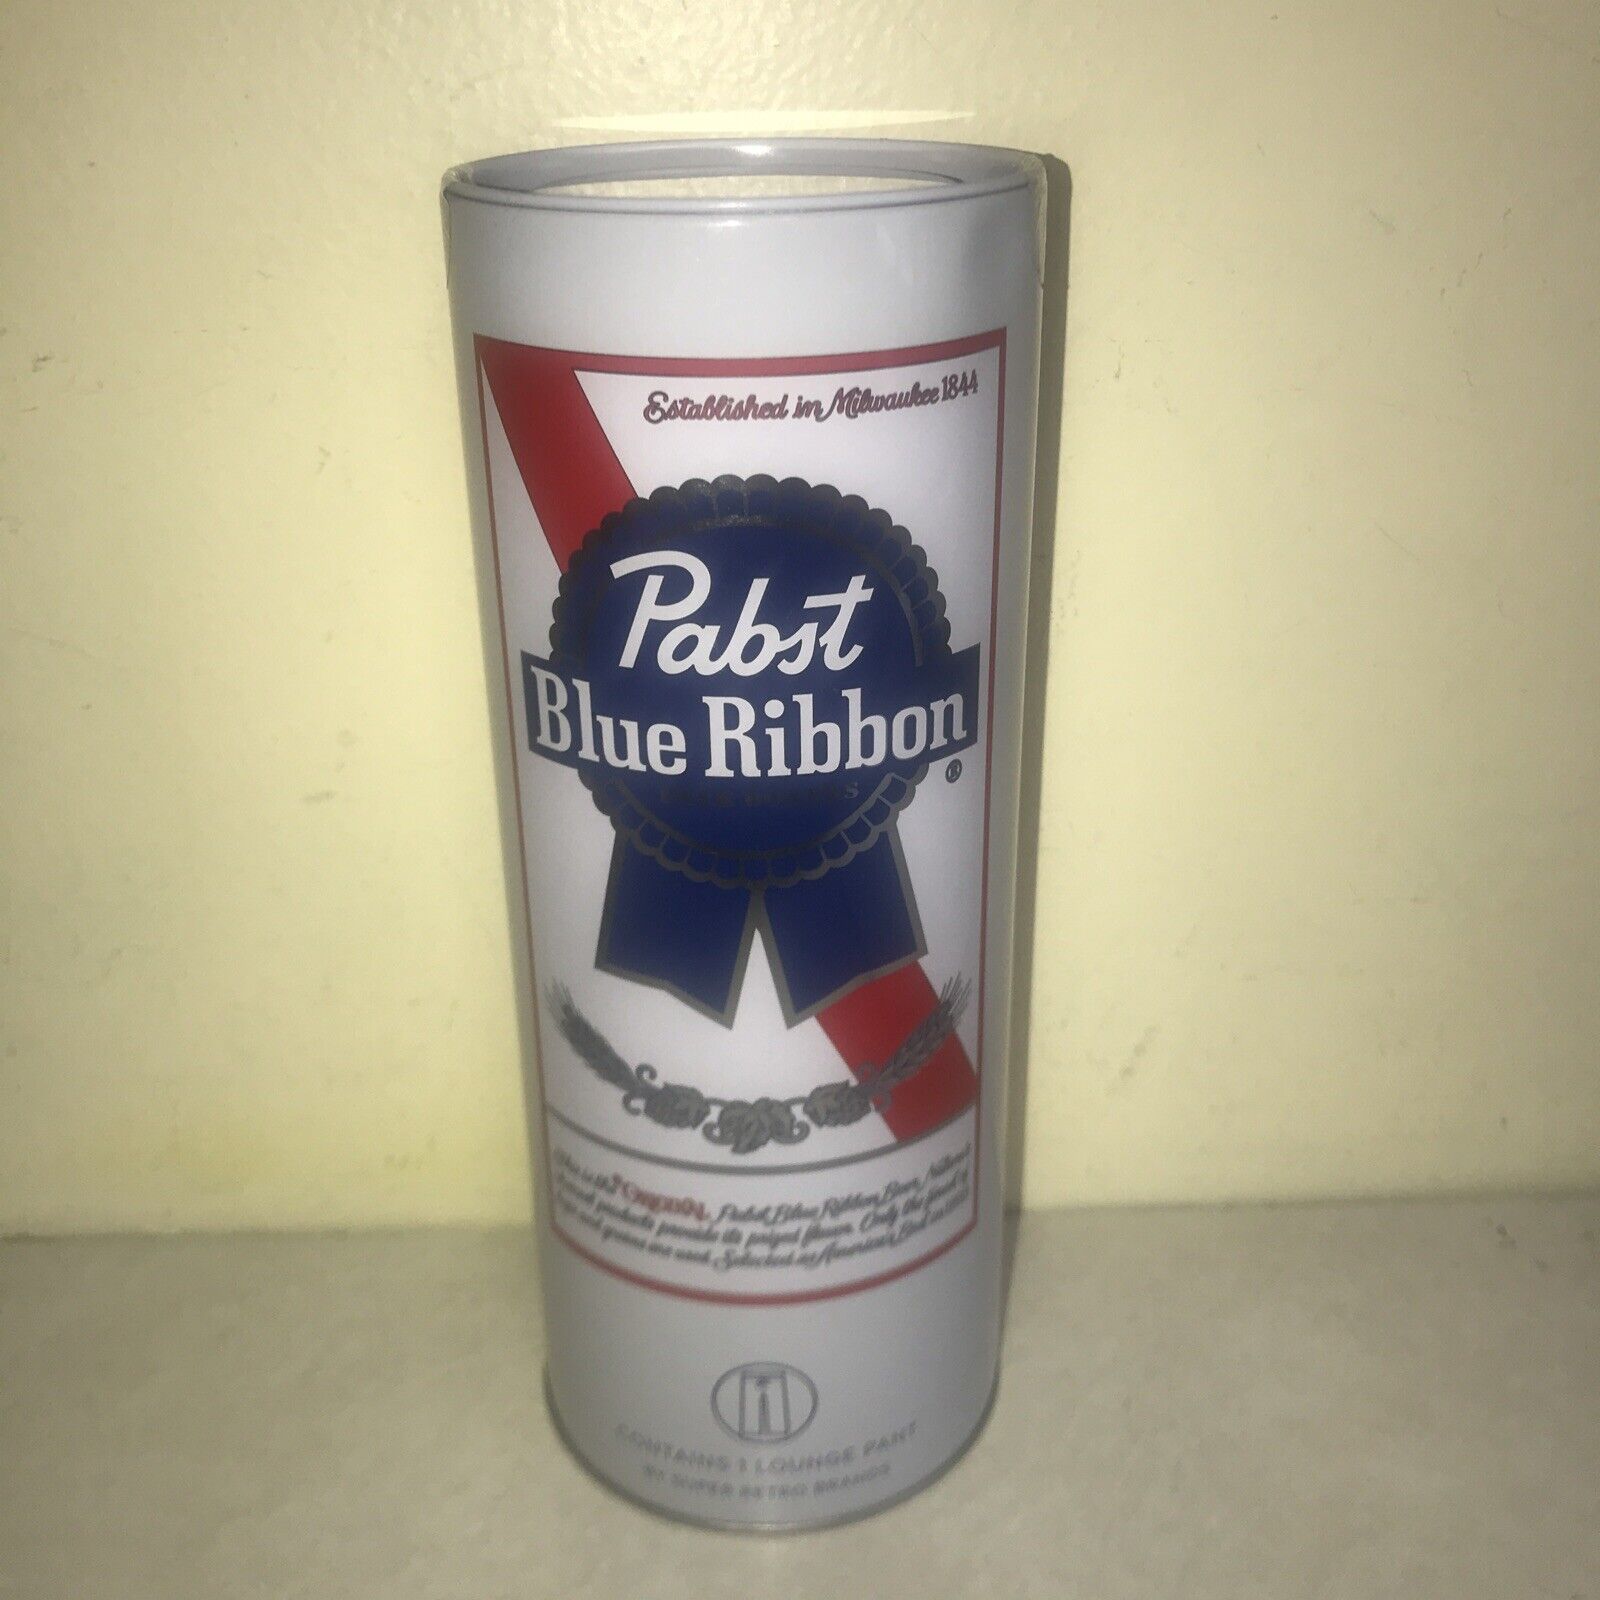 PBR Pabst Blue Ribbon Beer Lounge Pants in a can-SIZE SMALL S Swag Boxers Pabst Blue Ribbon - фотография #4